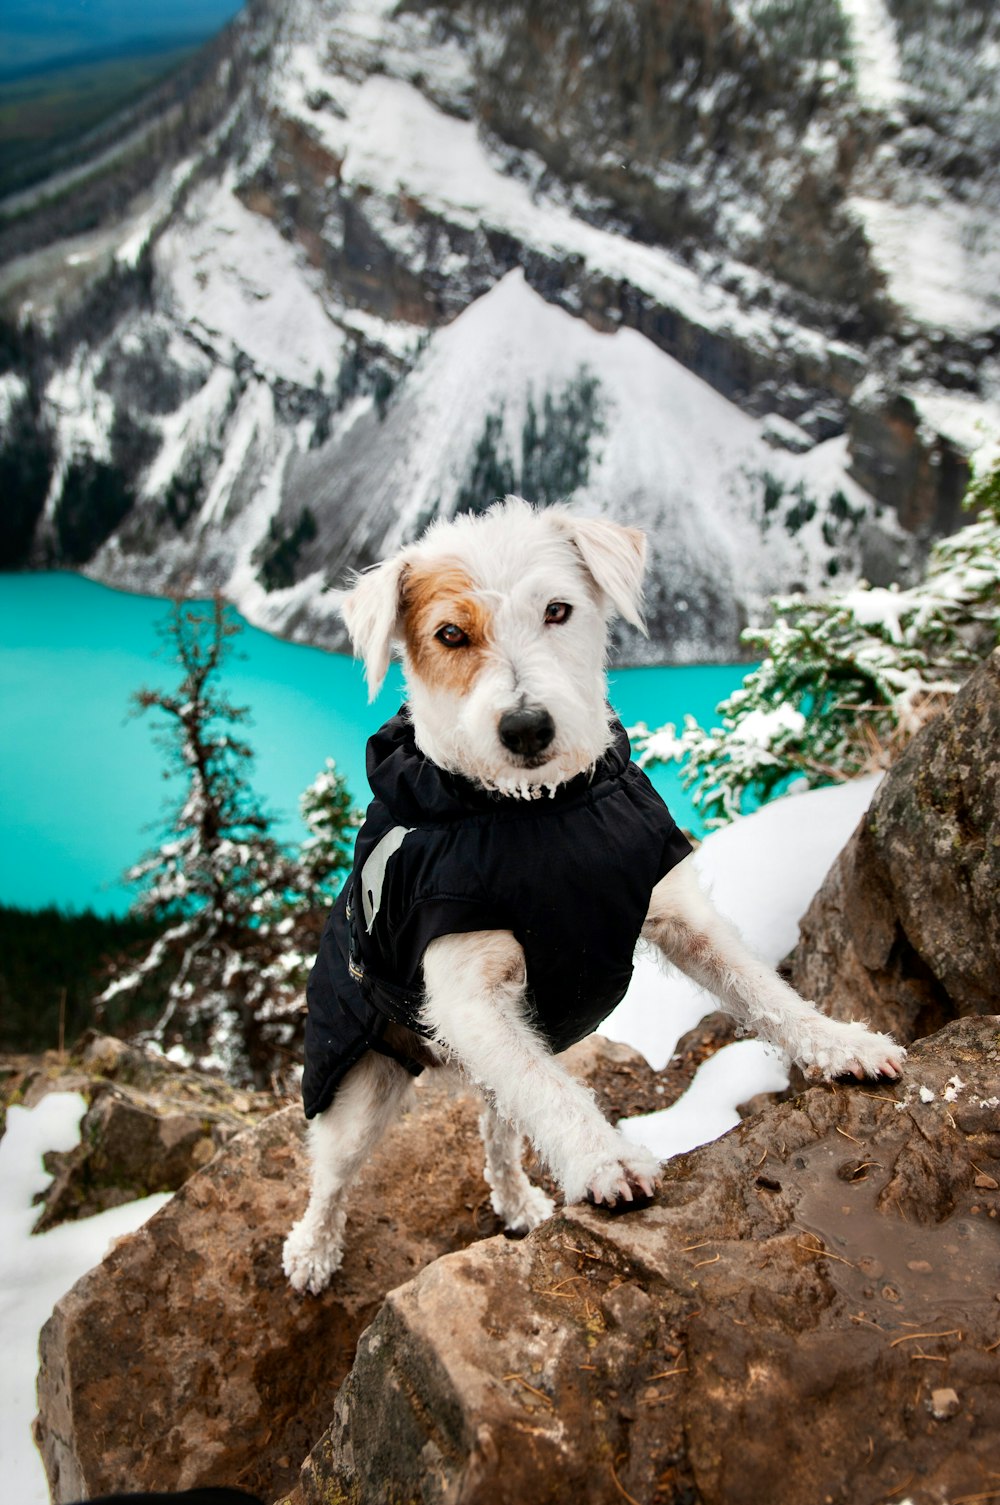 a white dog wearing a black shirt standing on a rock